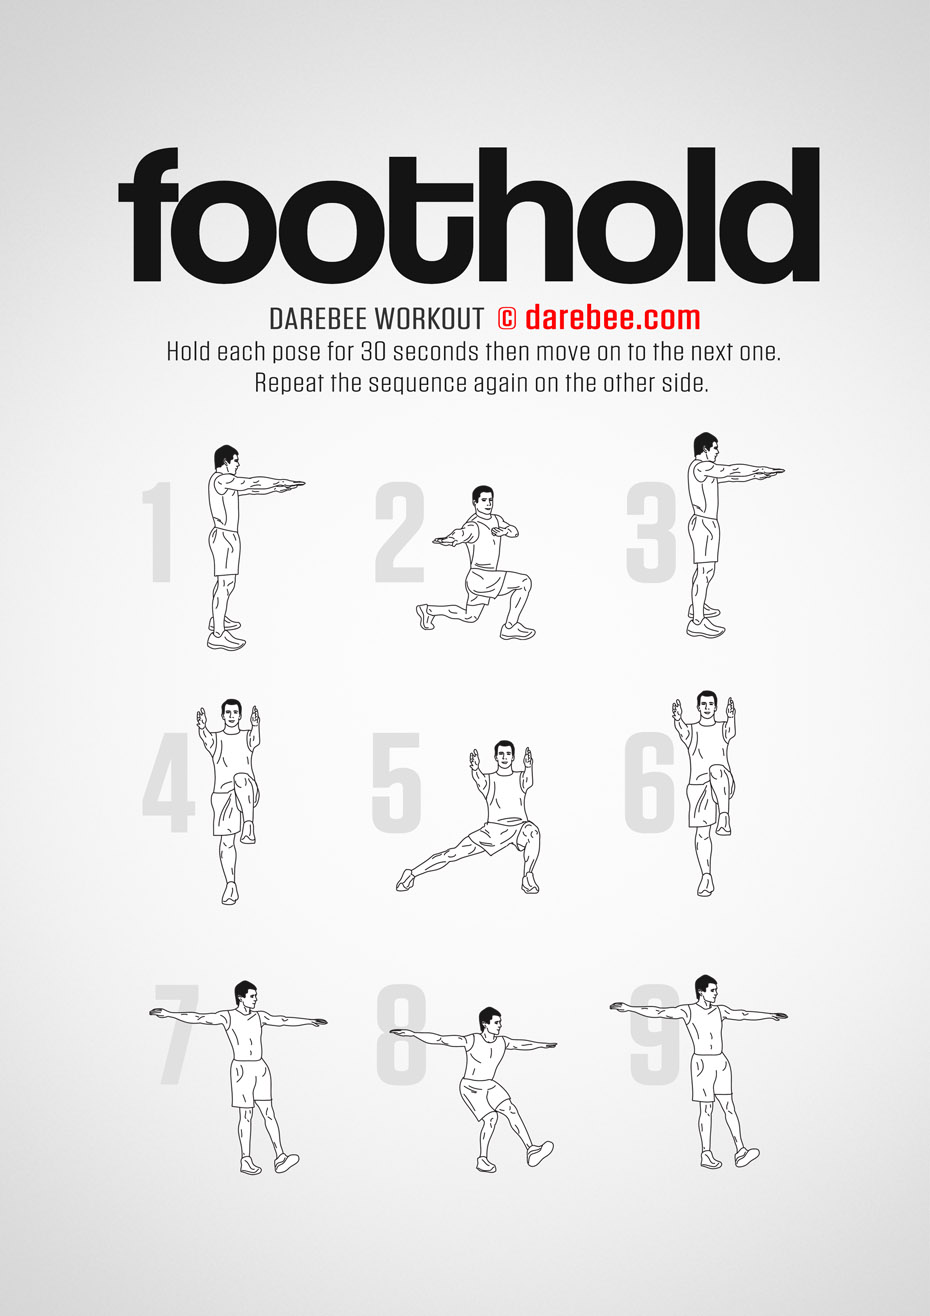 Foothold is a Darebee home fitness isometric workout that will challenge your coordination and balance and help your joints be stronger. 